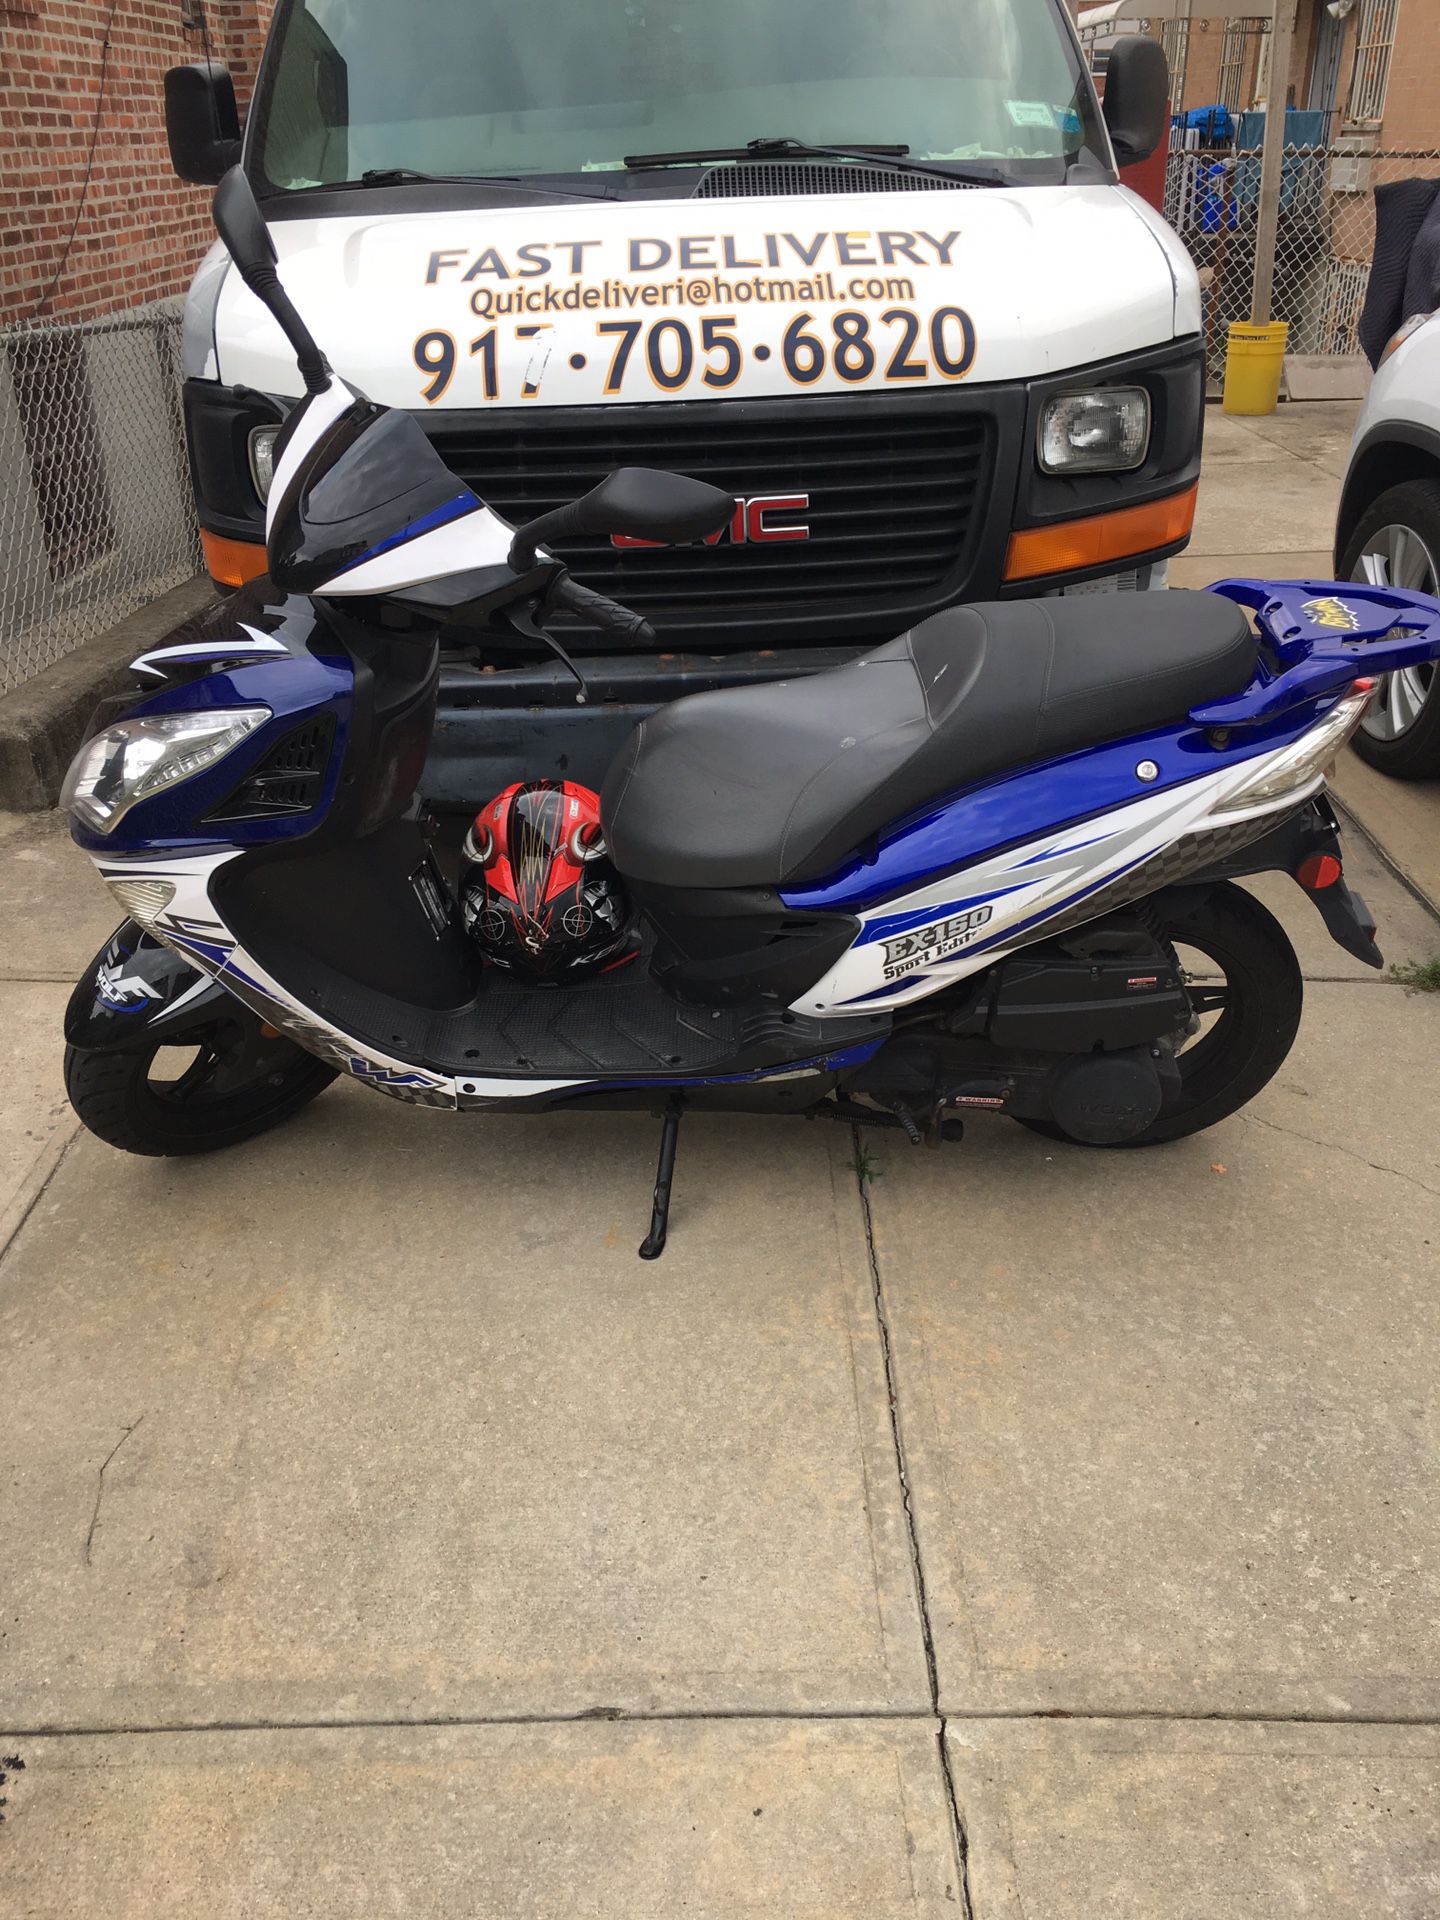 2018 150 cc motor scooter, $850 ONLY if u pick up RN OTHERWISE ITS $900 PERIOD read post careful.